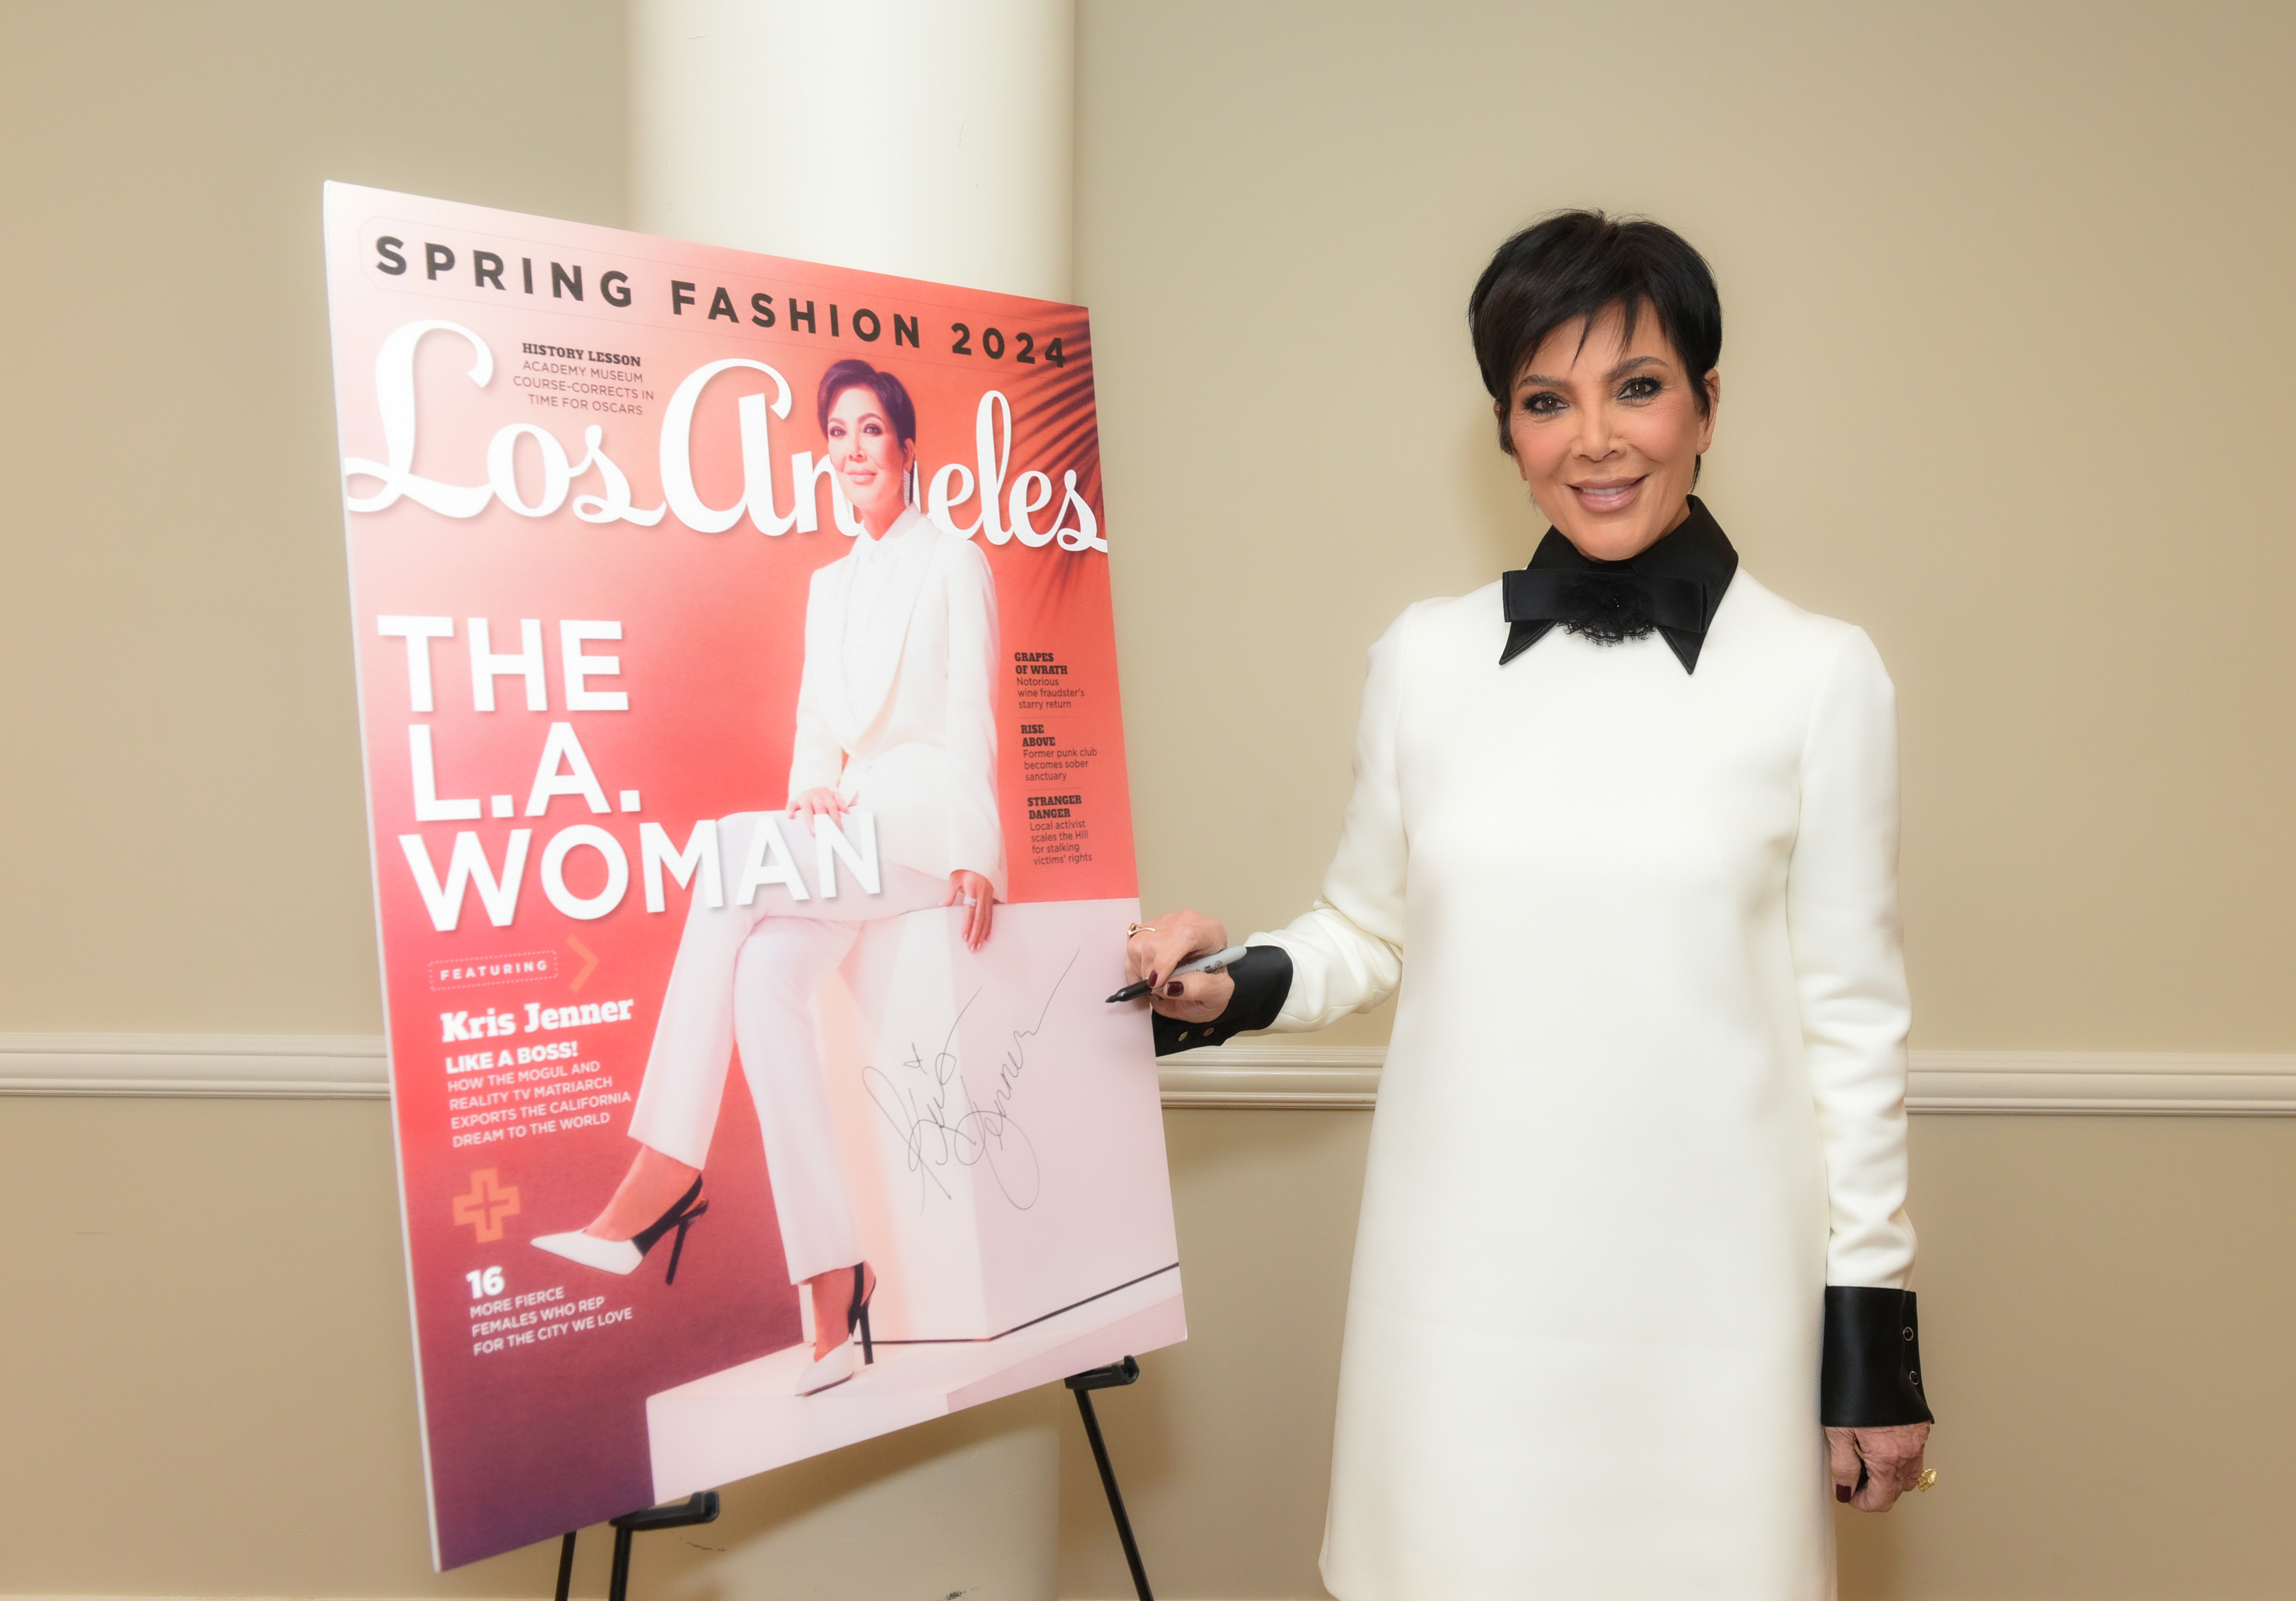 Kris Jenner stands beside a magazine cover featuring her, wearing a white dress with a black bow tie neckline